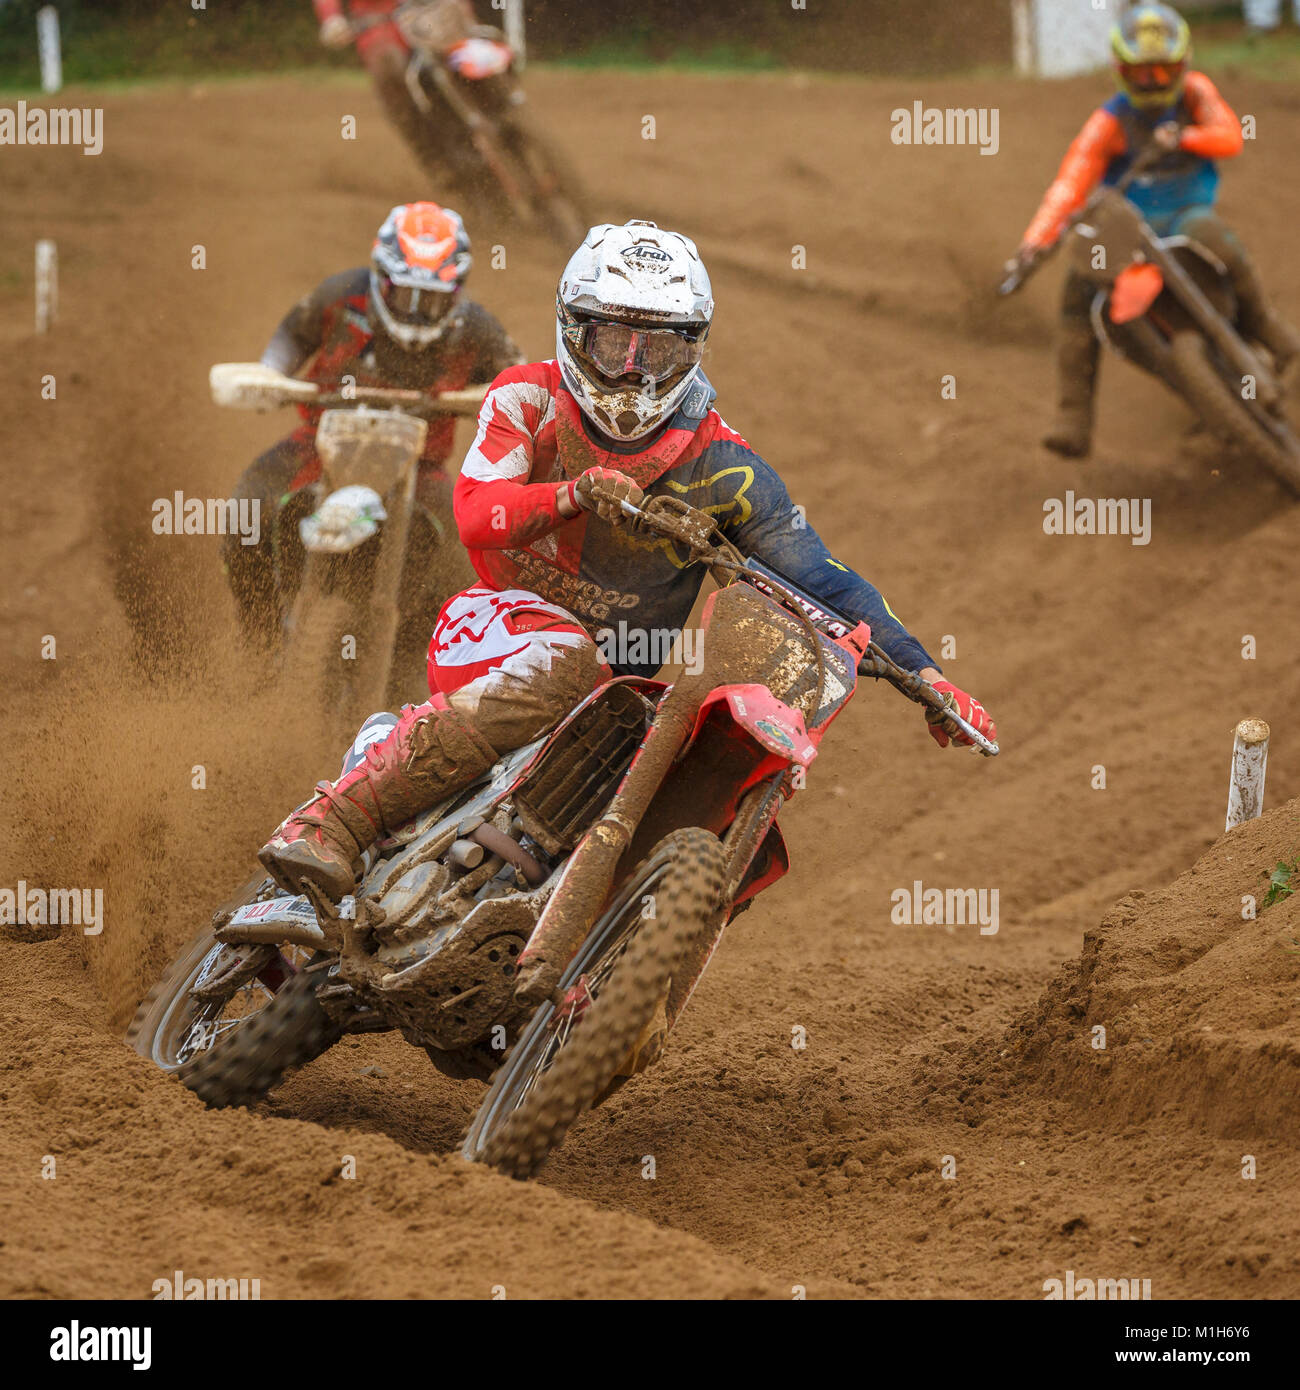 George Turner on the Eastwood Racing Wiseco Honda 250 at the NGR & ACU Eastern EVO Solo Motocross Championships, Cadders Hill, Lyng, Norfolk, UK. Stock Photo